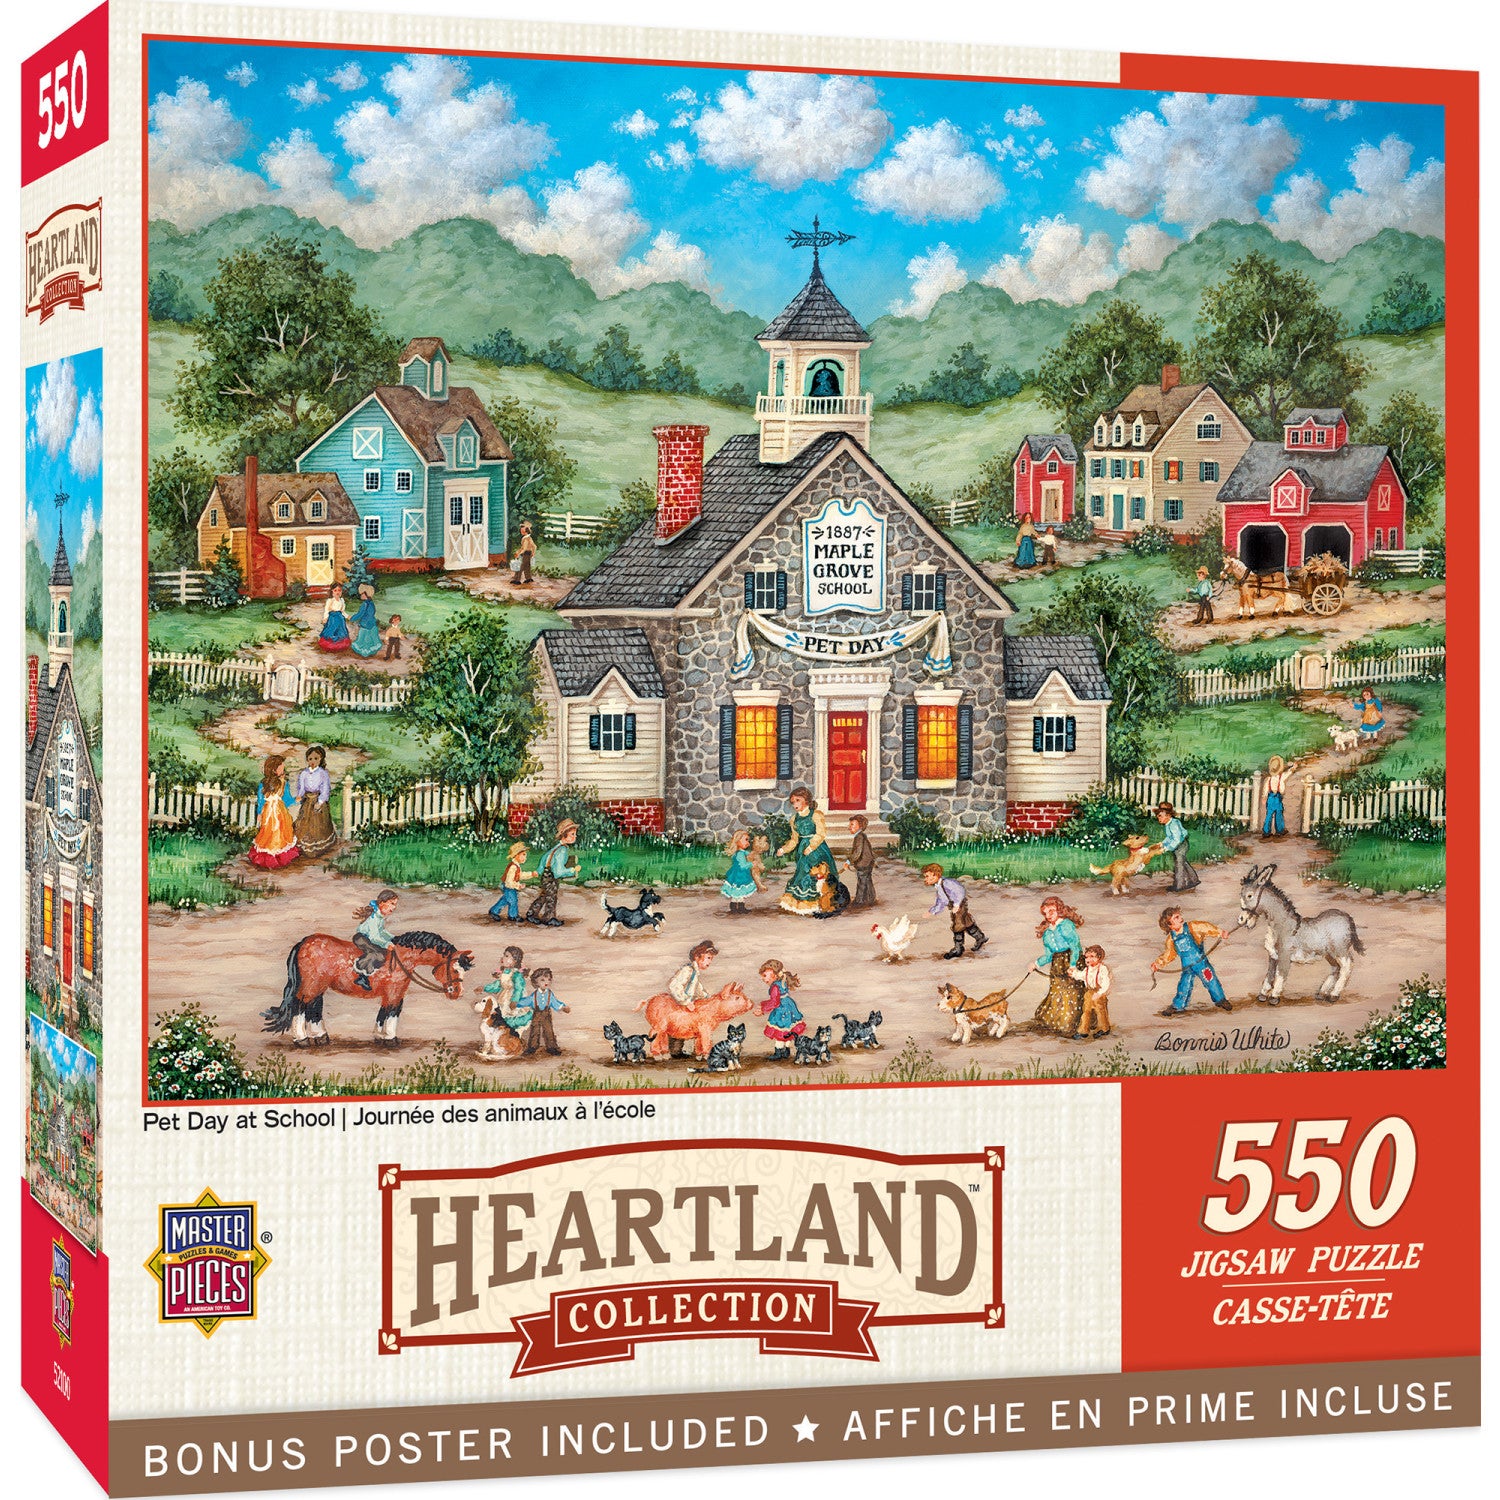 Heartland - Pet Day at School 550 Piece Jigsaw Puzzle